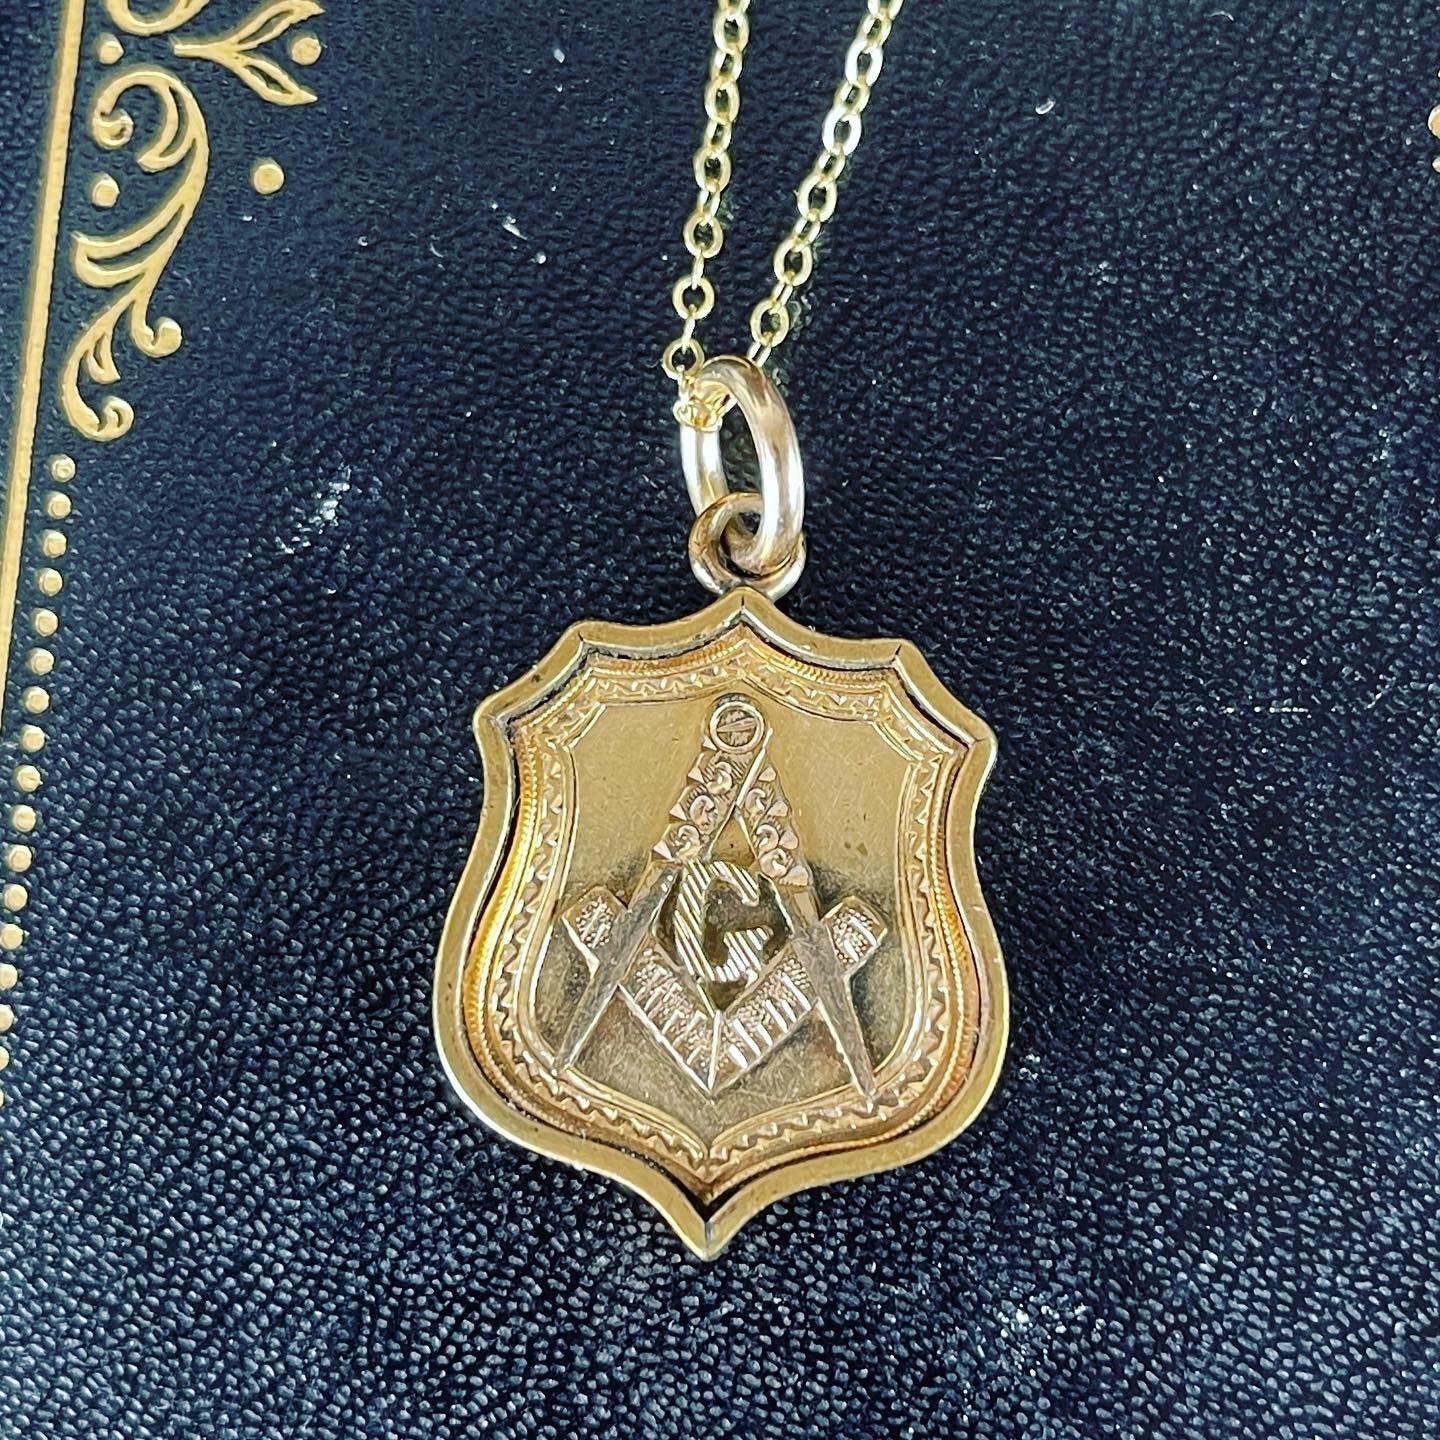 Antique Masonic Gold Filled Pendant - Loved To Death